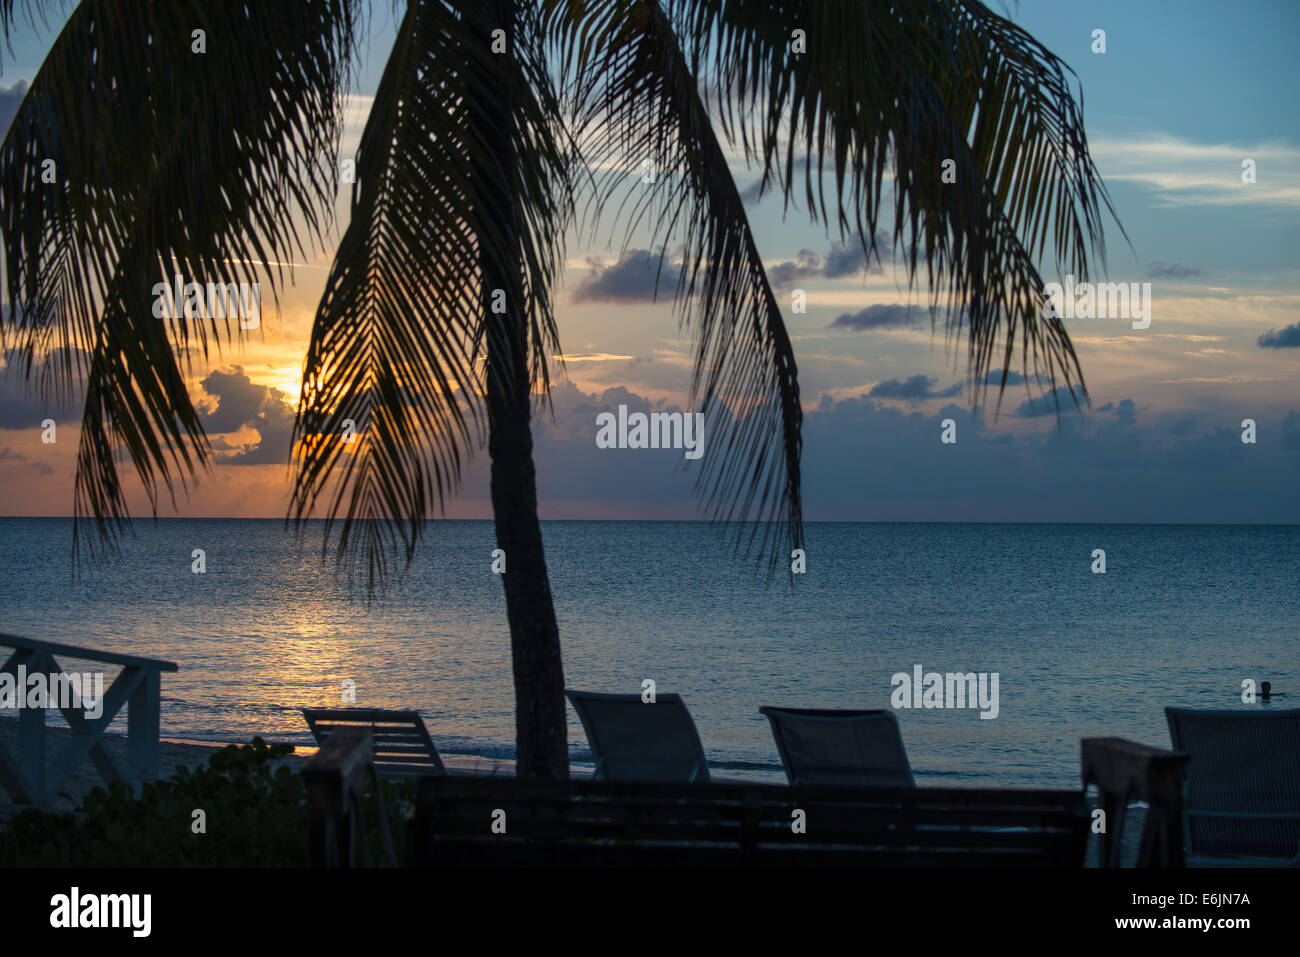 Looking through the fronds of a coconut palm, the sun sets over the Caribbean sea. Stock Photo